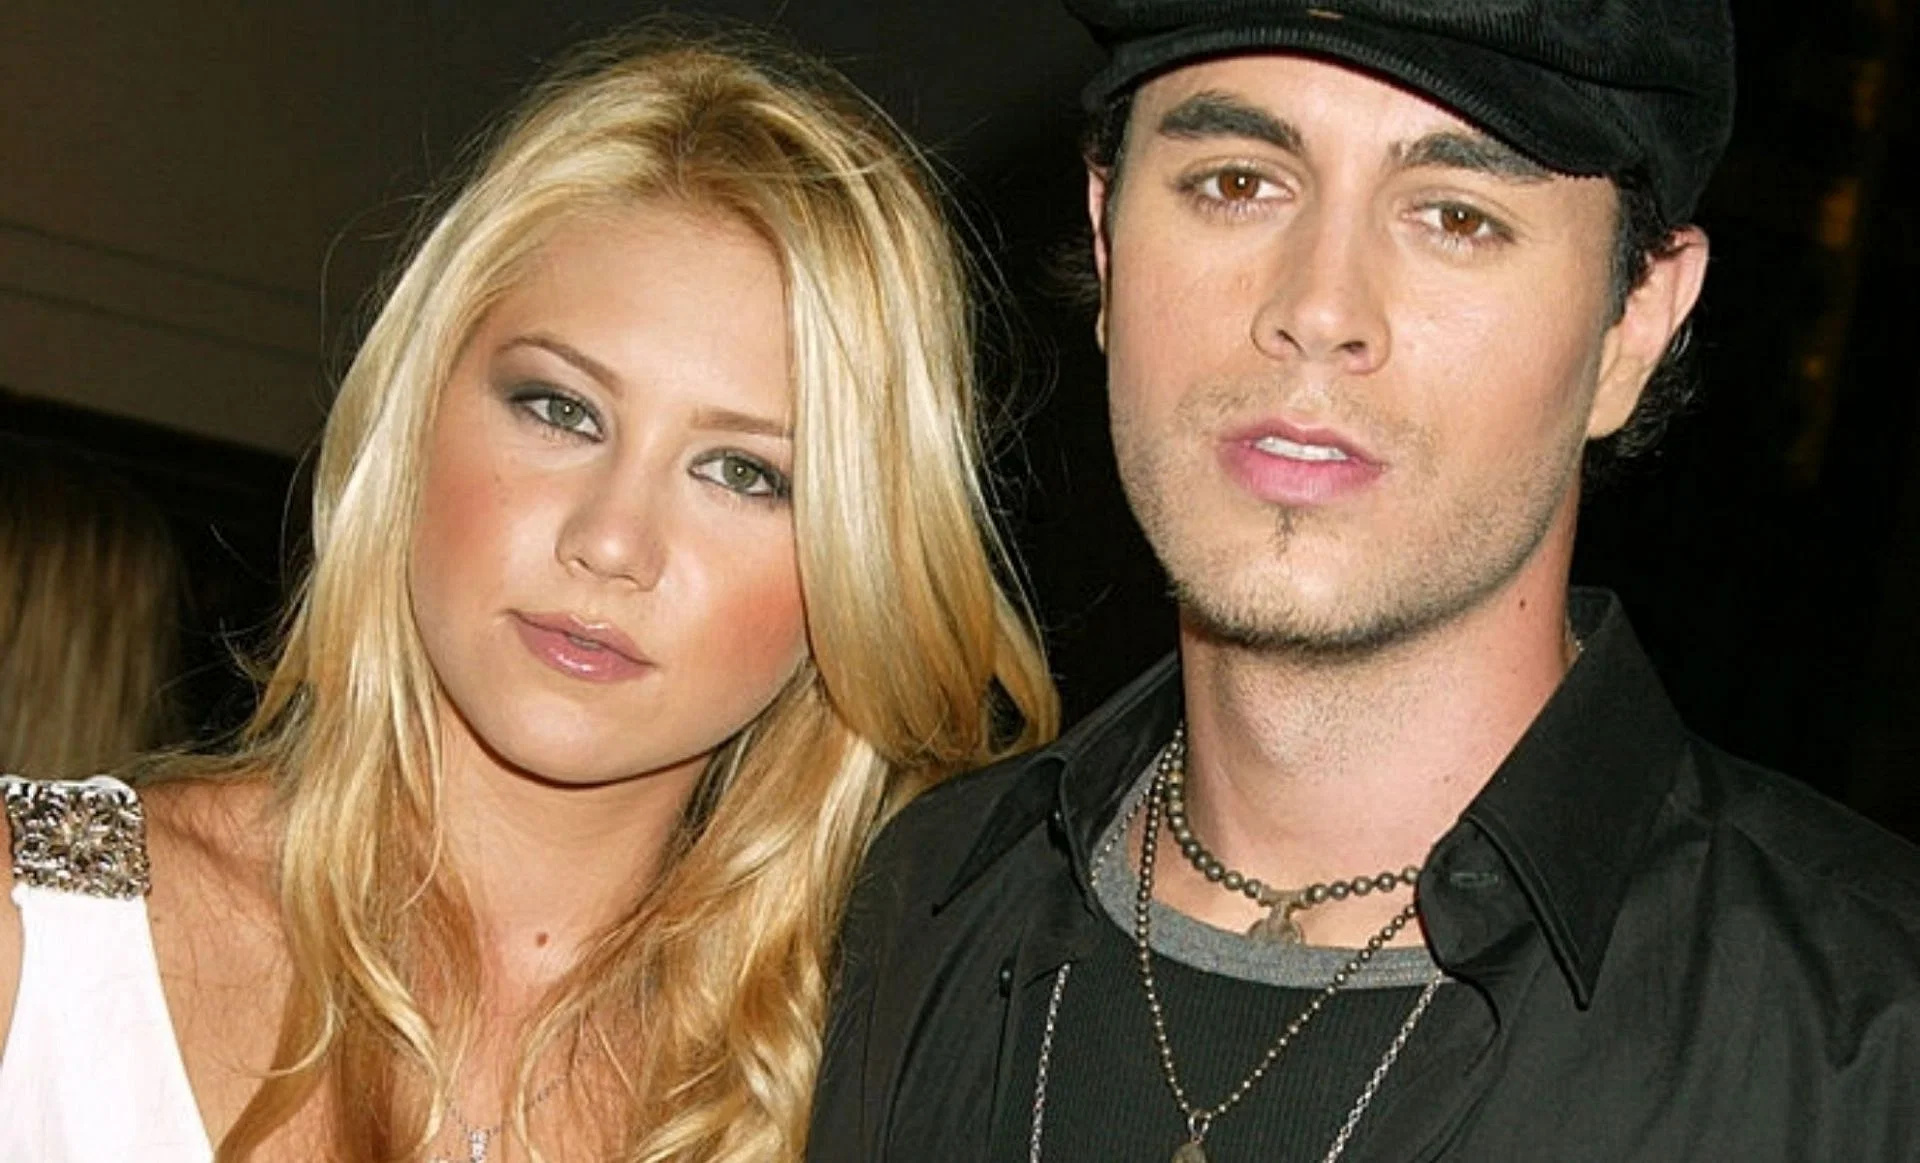 Enrique Iglesias and Anna Kournikova: Former tennis star, Long lasting romance with the singer. 1920x1170 HD Background.